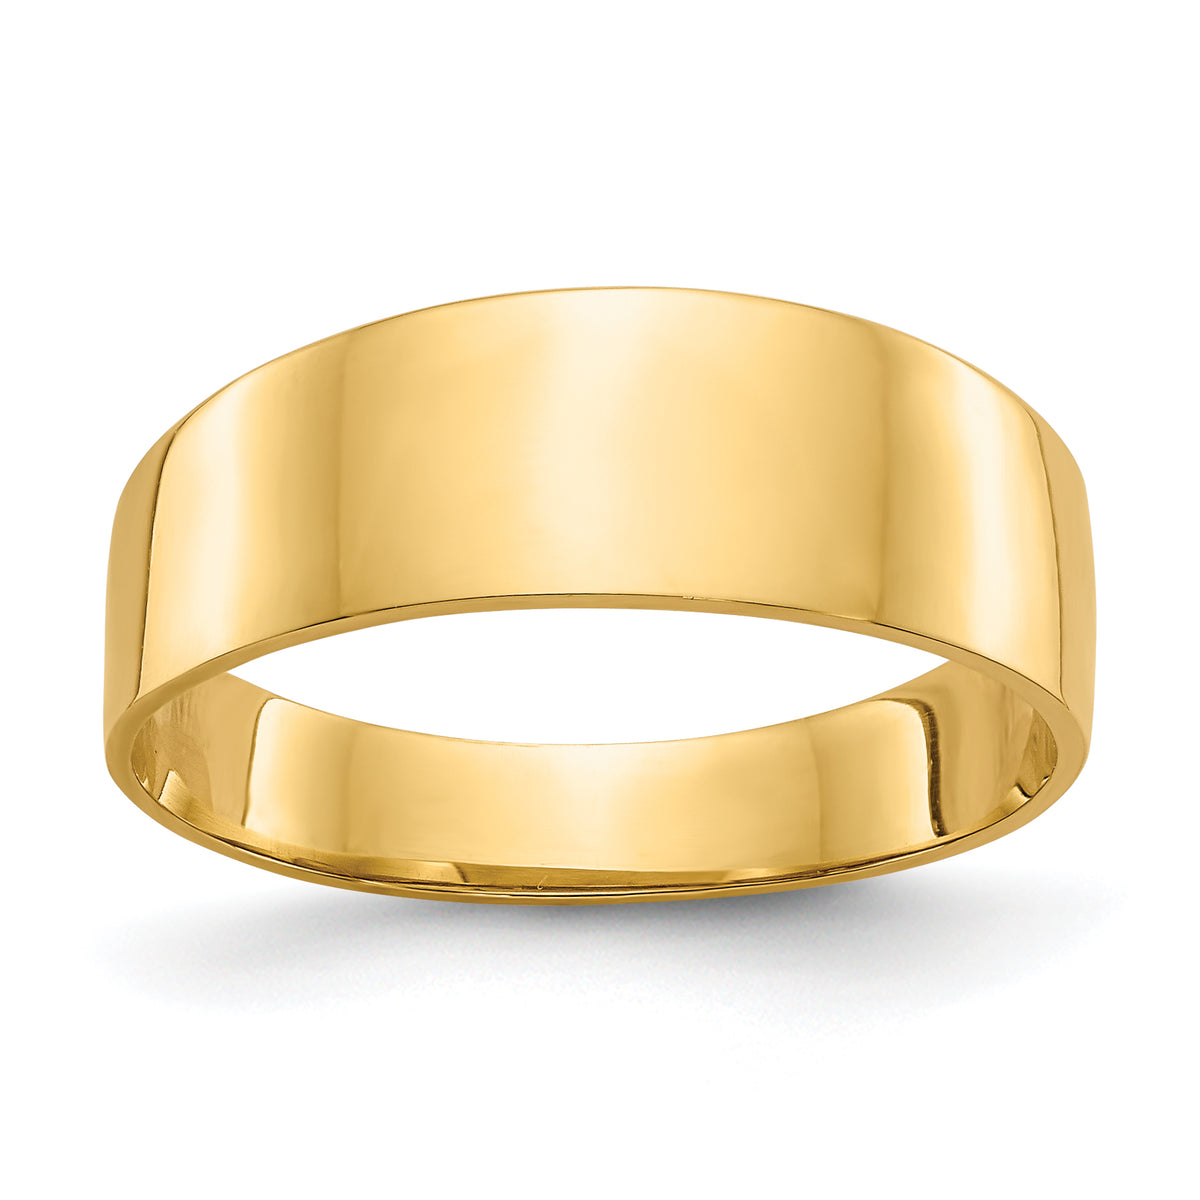 10K 3-6mm Flat-top Tapered Cigar Band Ring